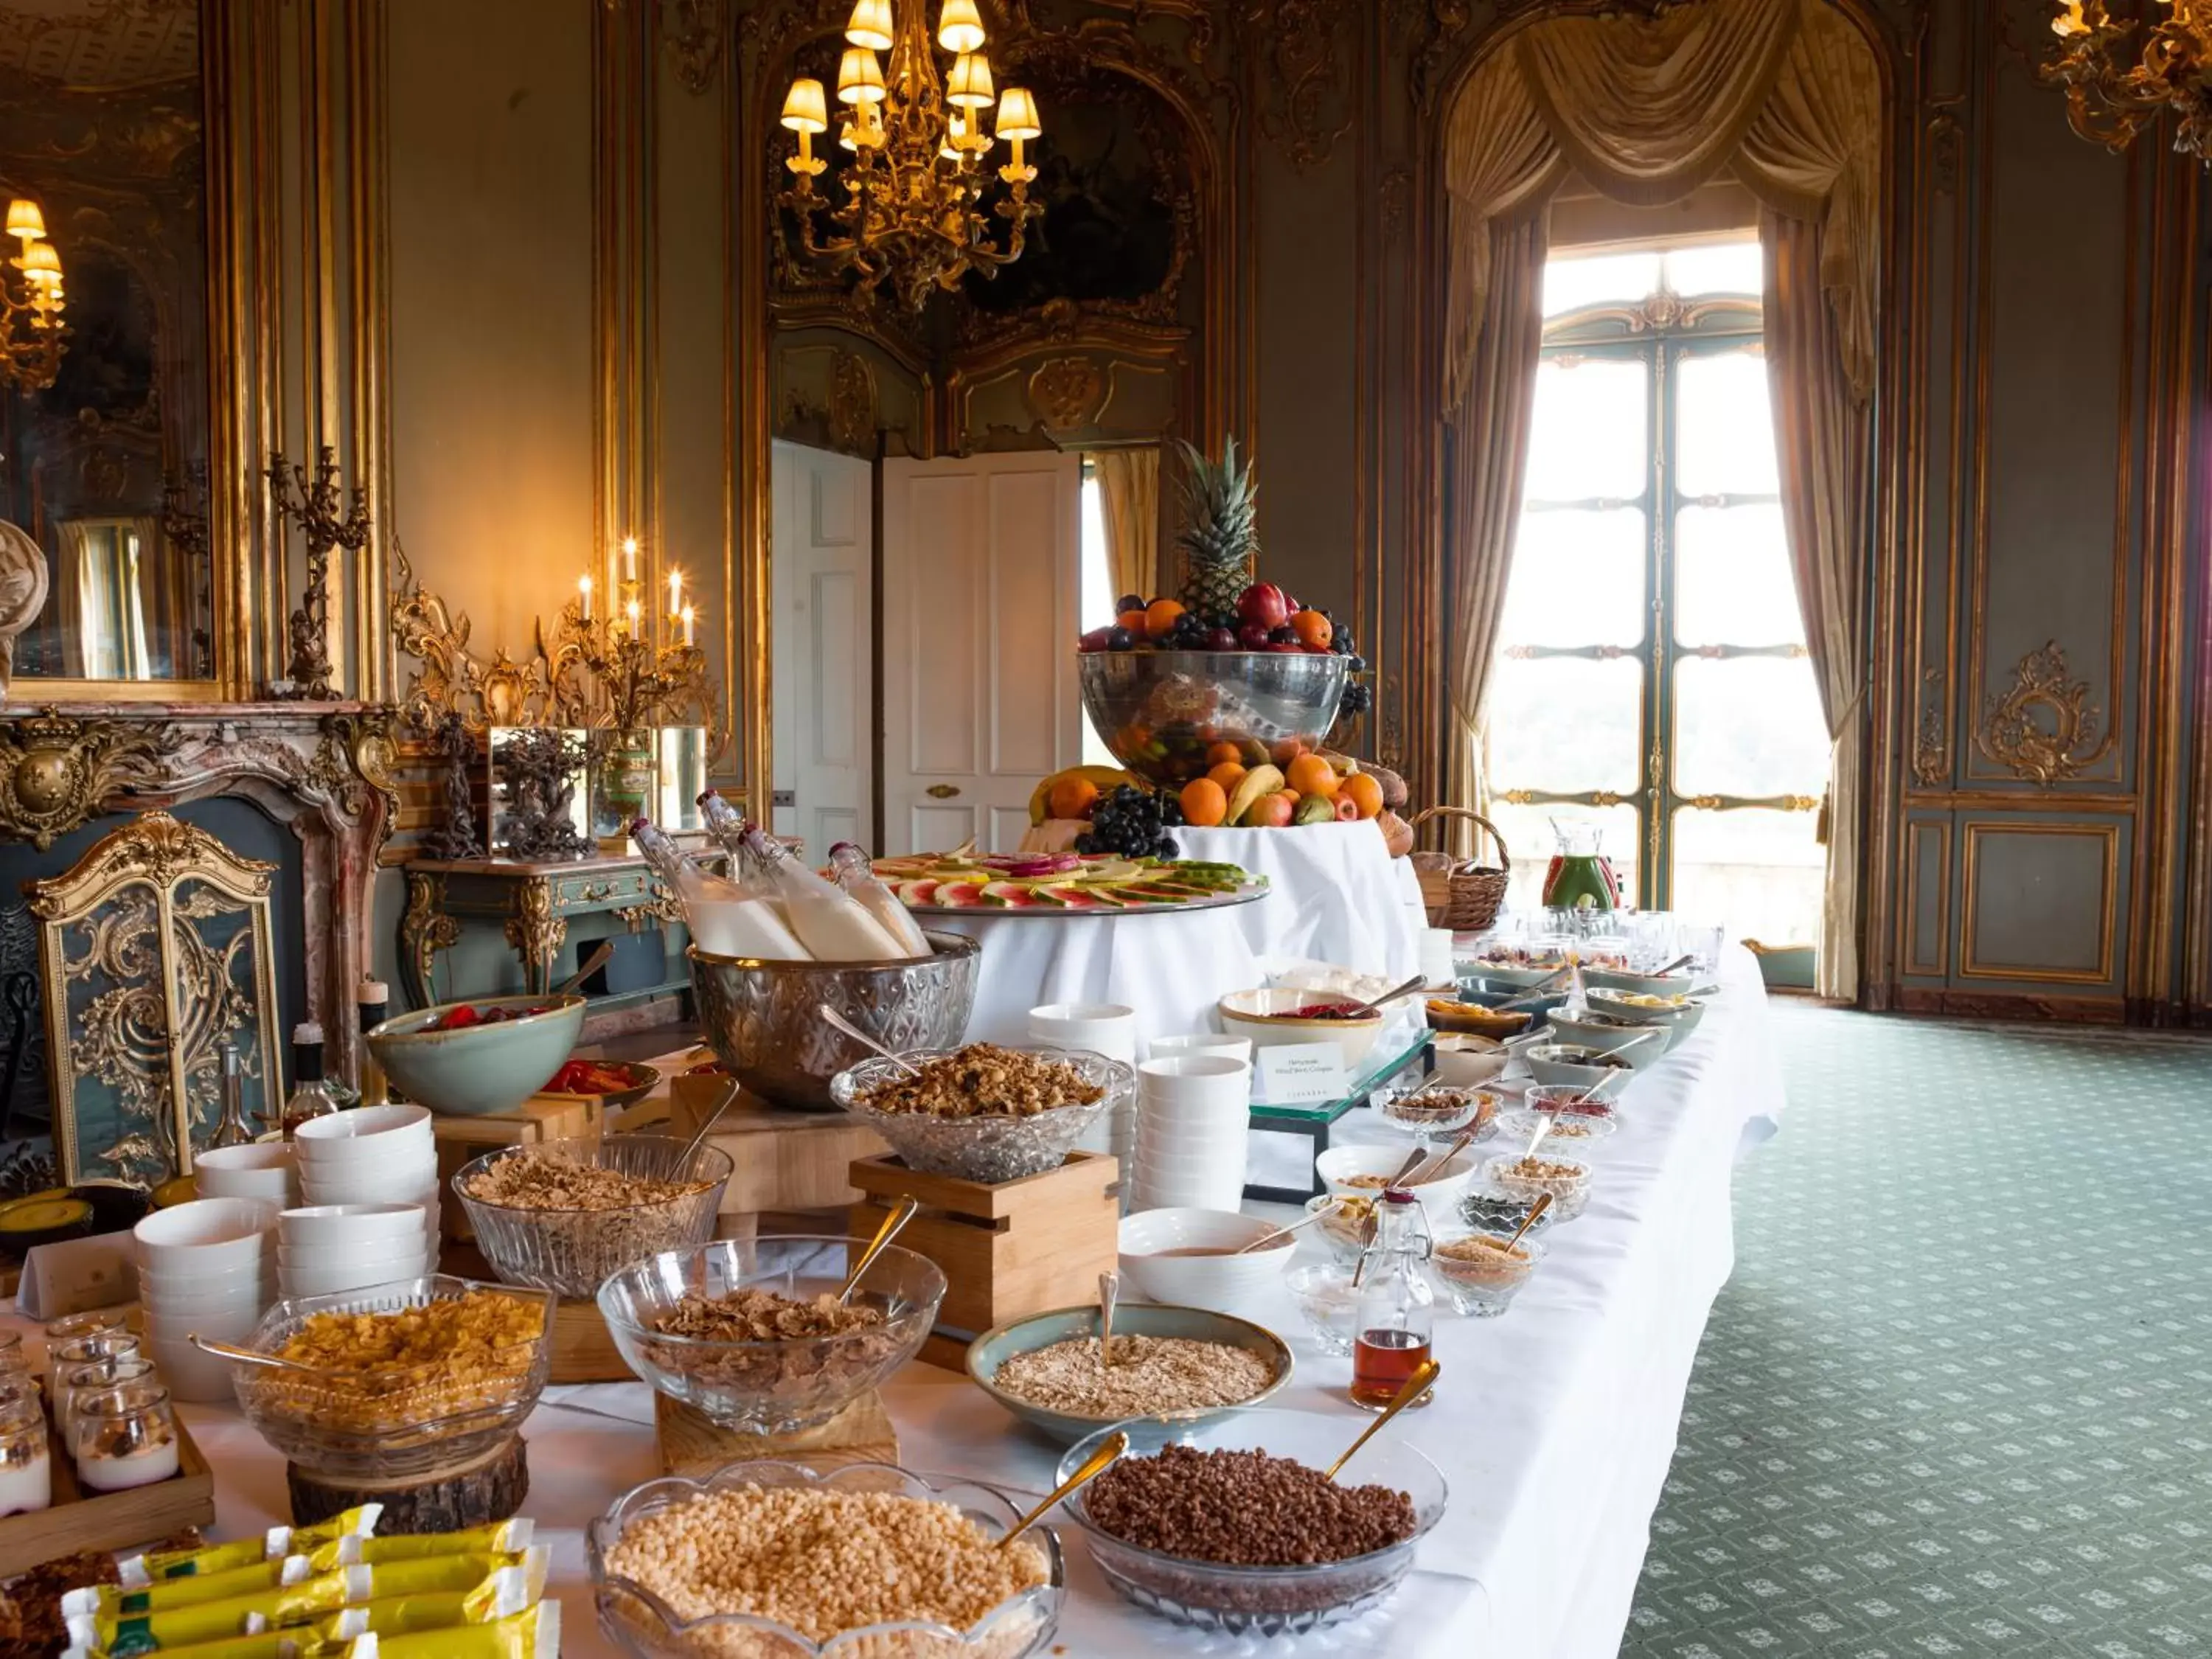 Breakfast in Cliveden House - an Iconic Luxury Hotel